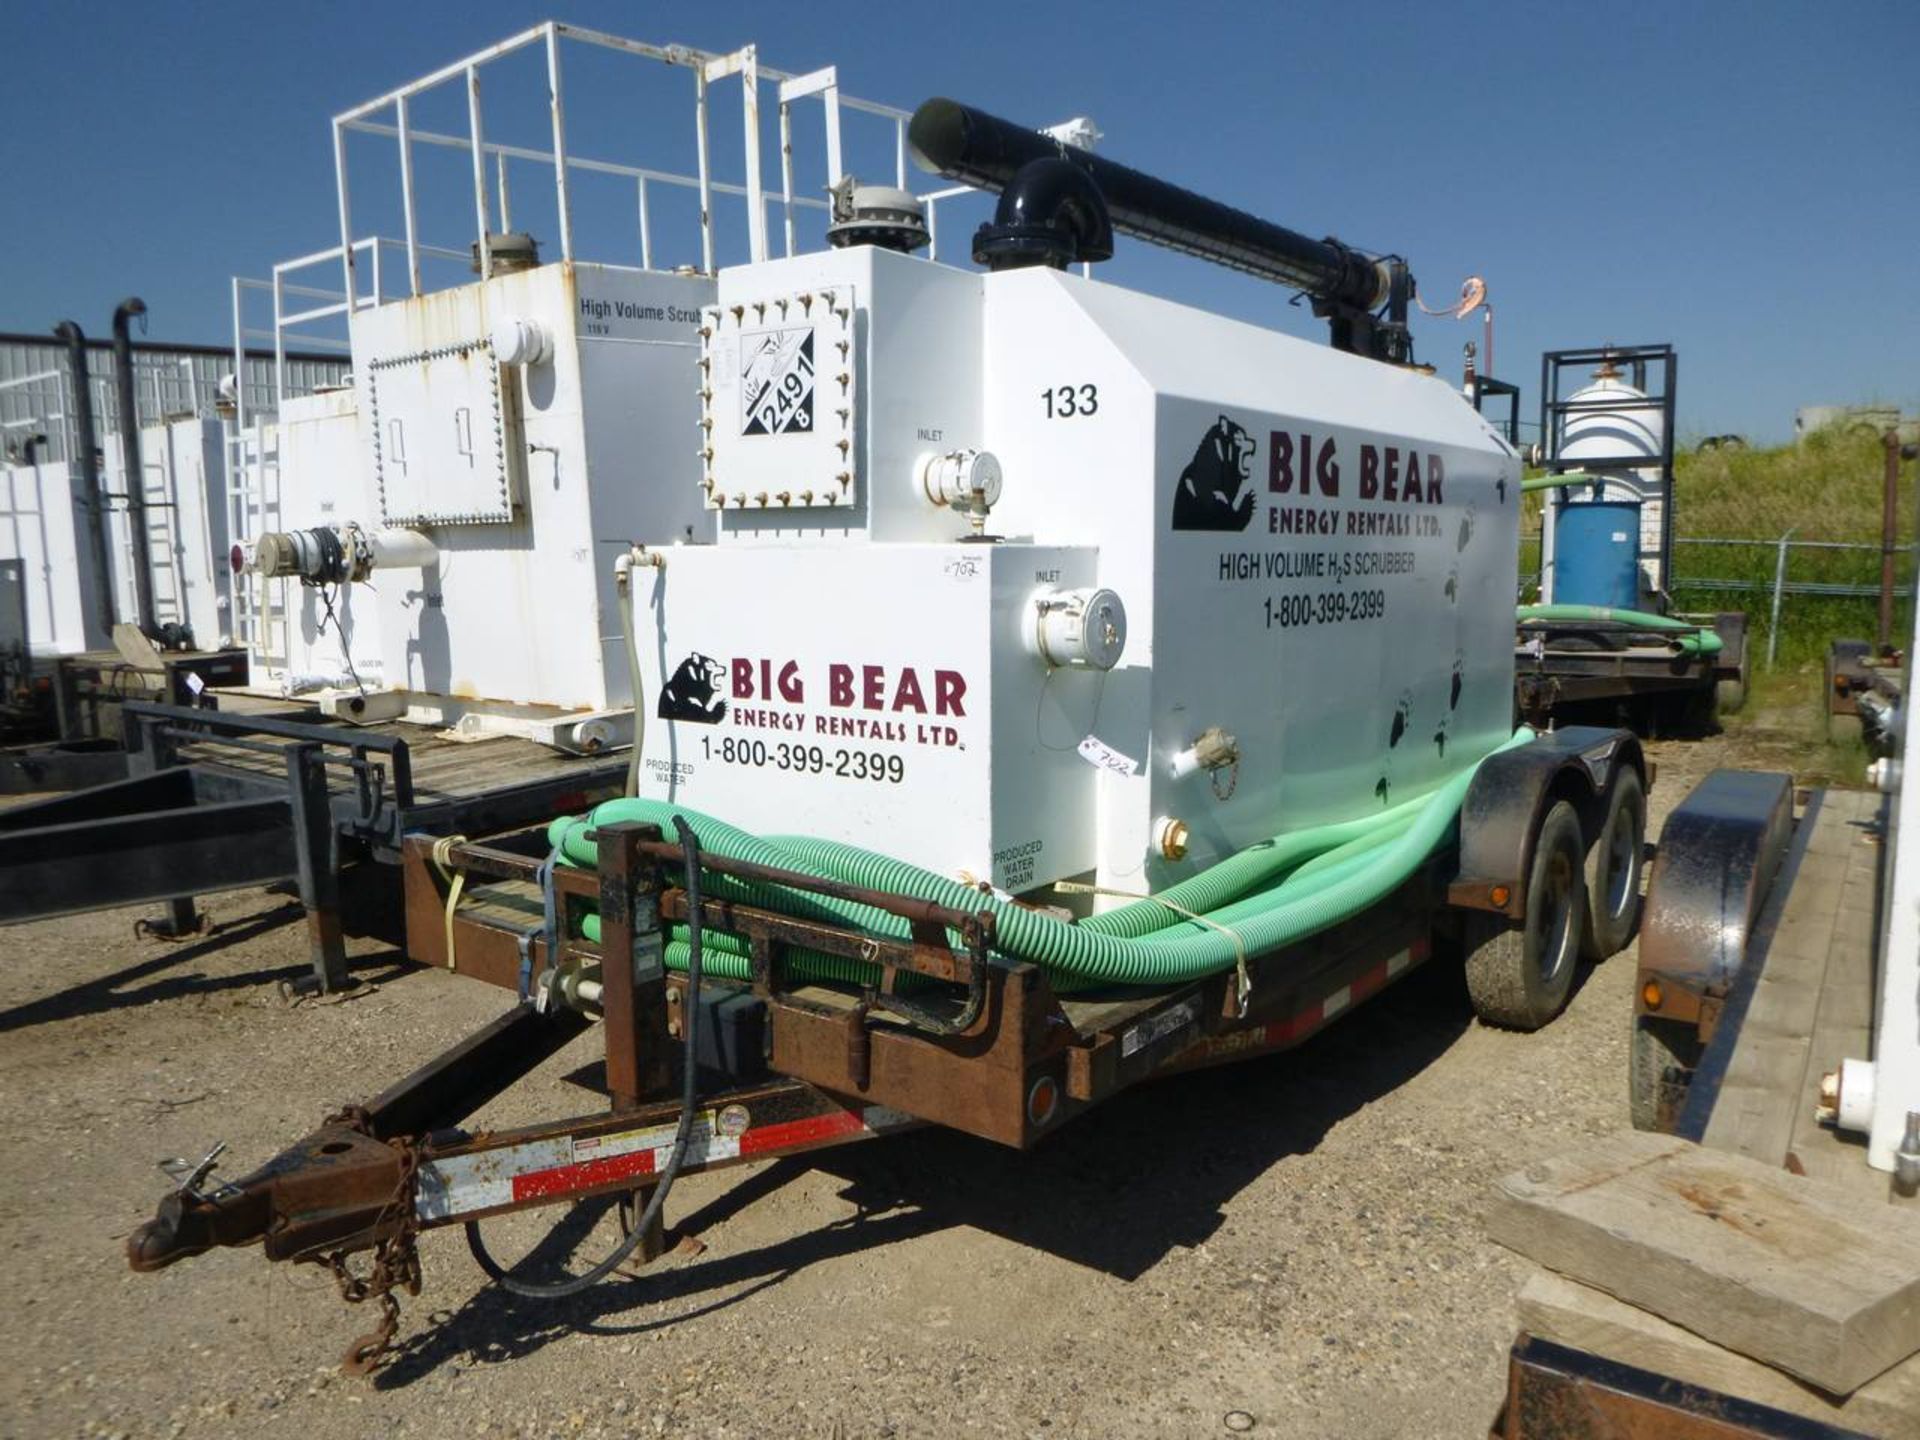 High volume H2S vac truck dry type scrubber system